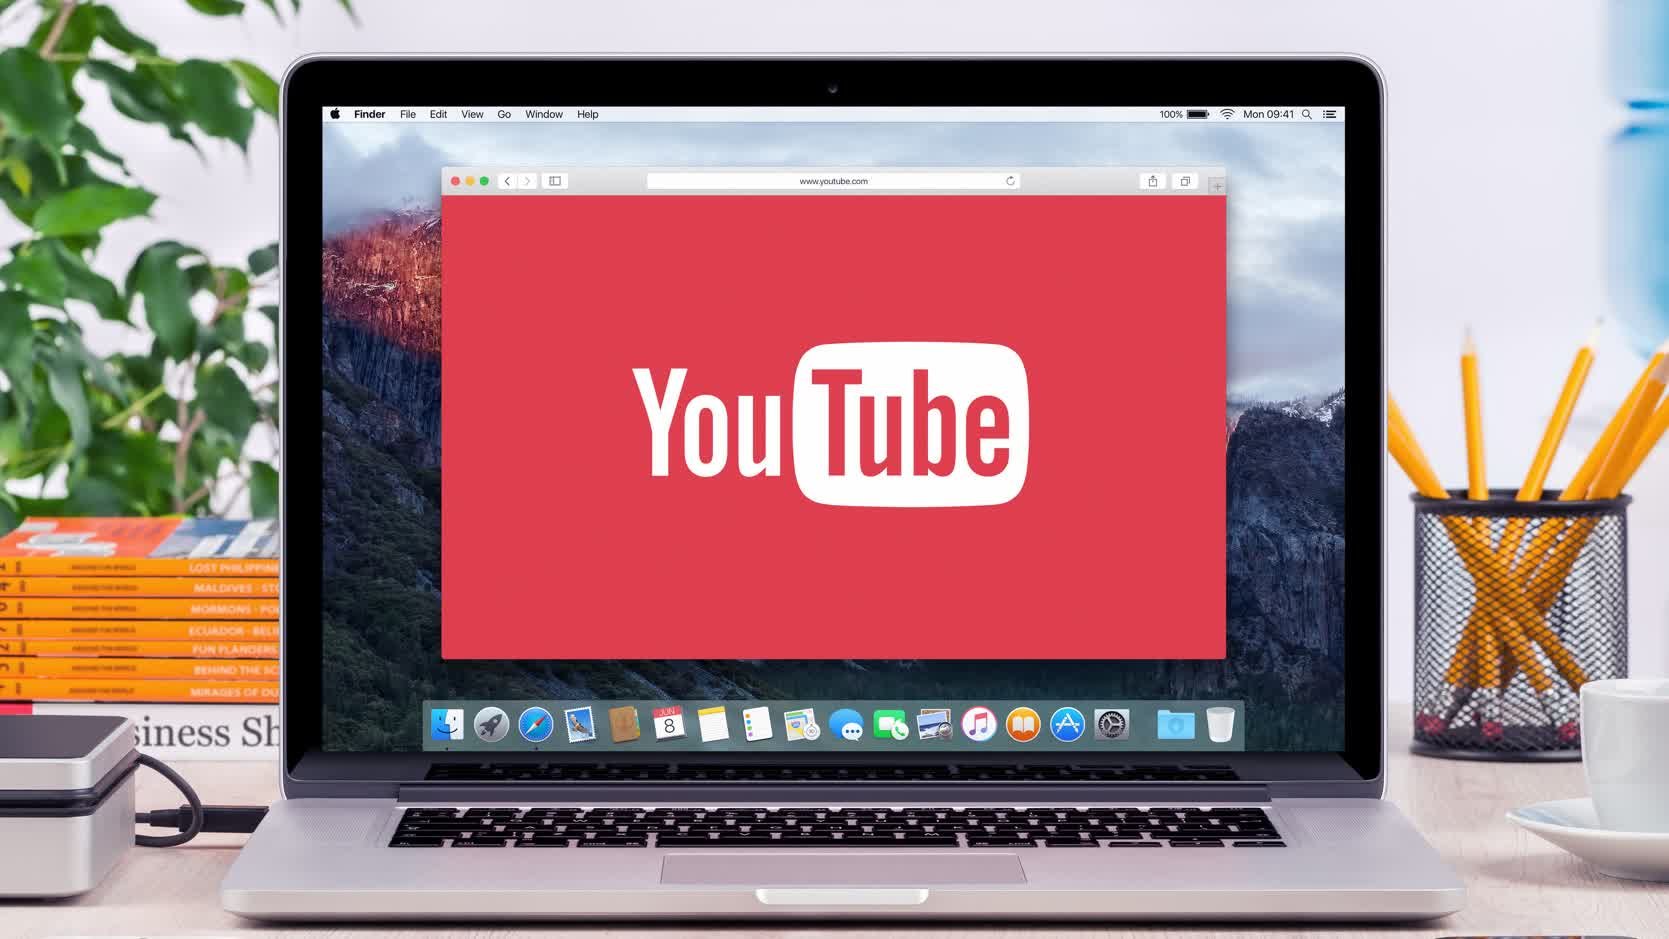 YouTube will be able to directly upload videos